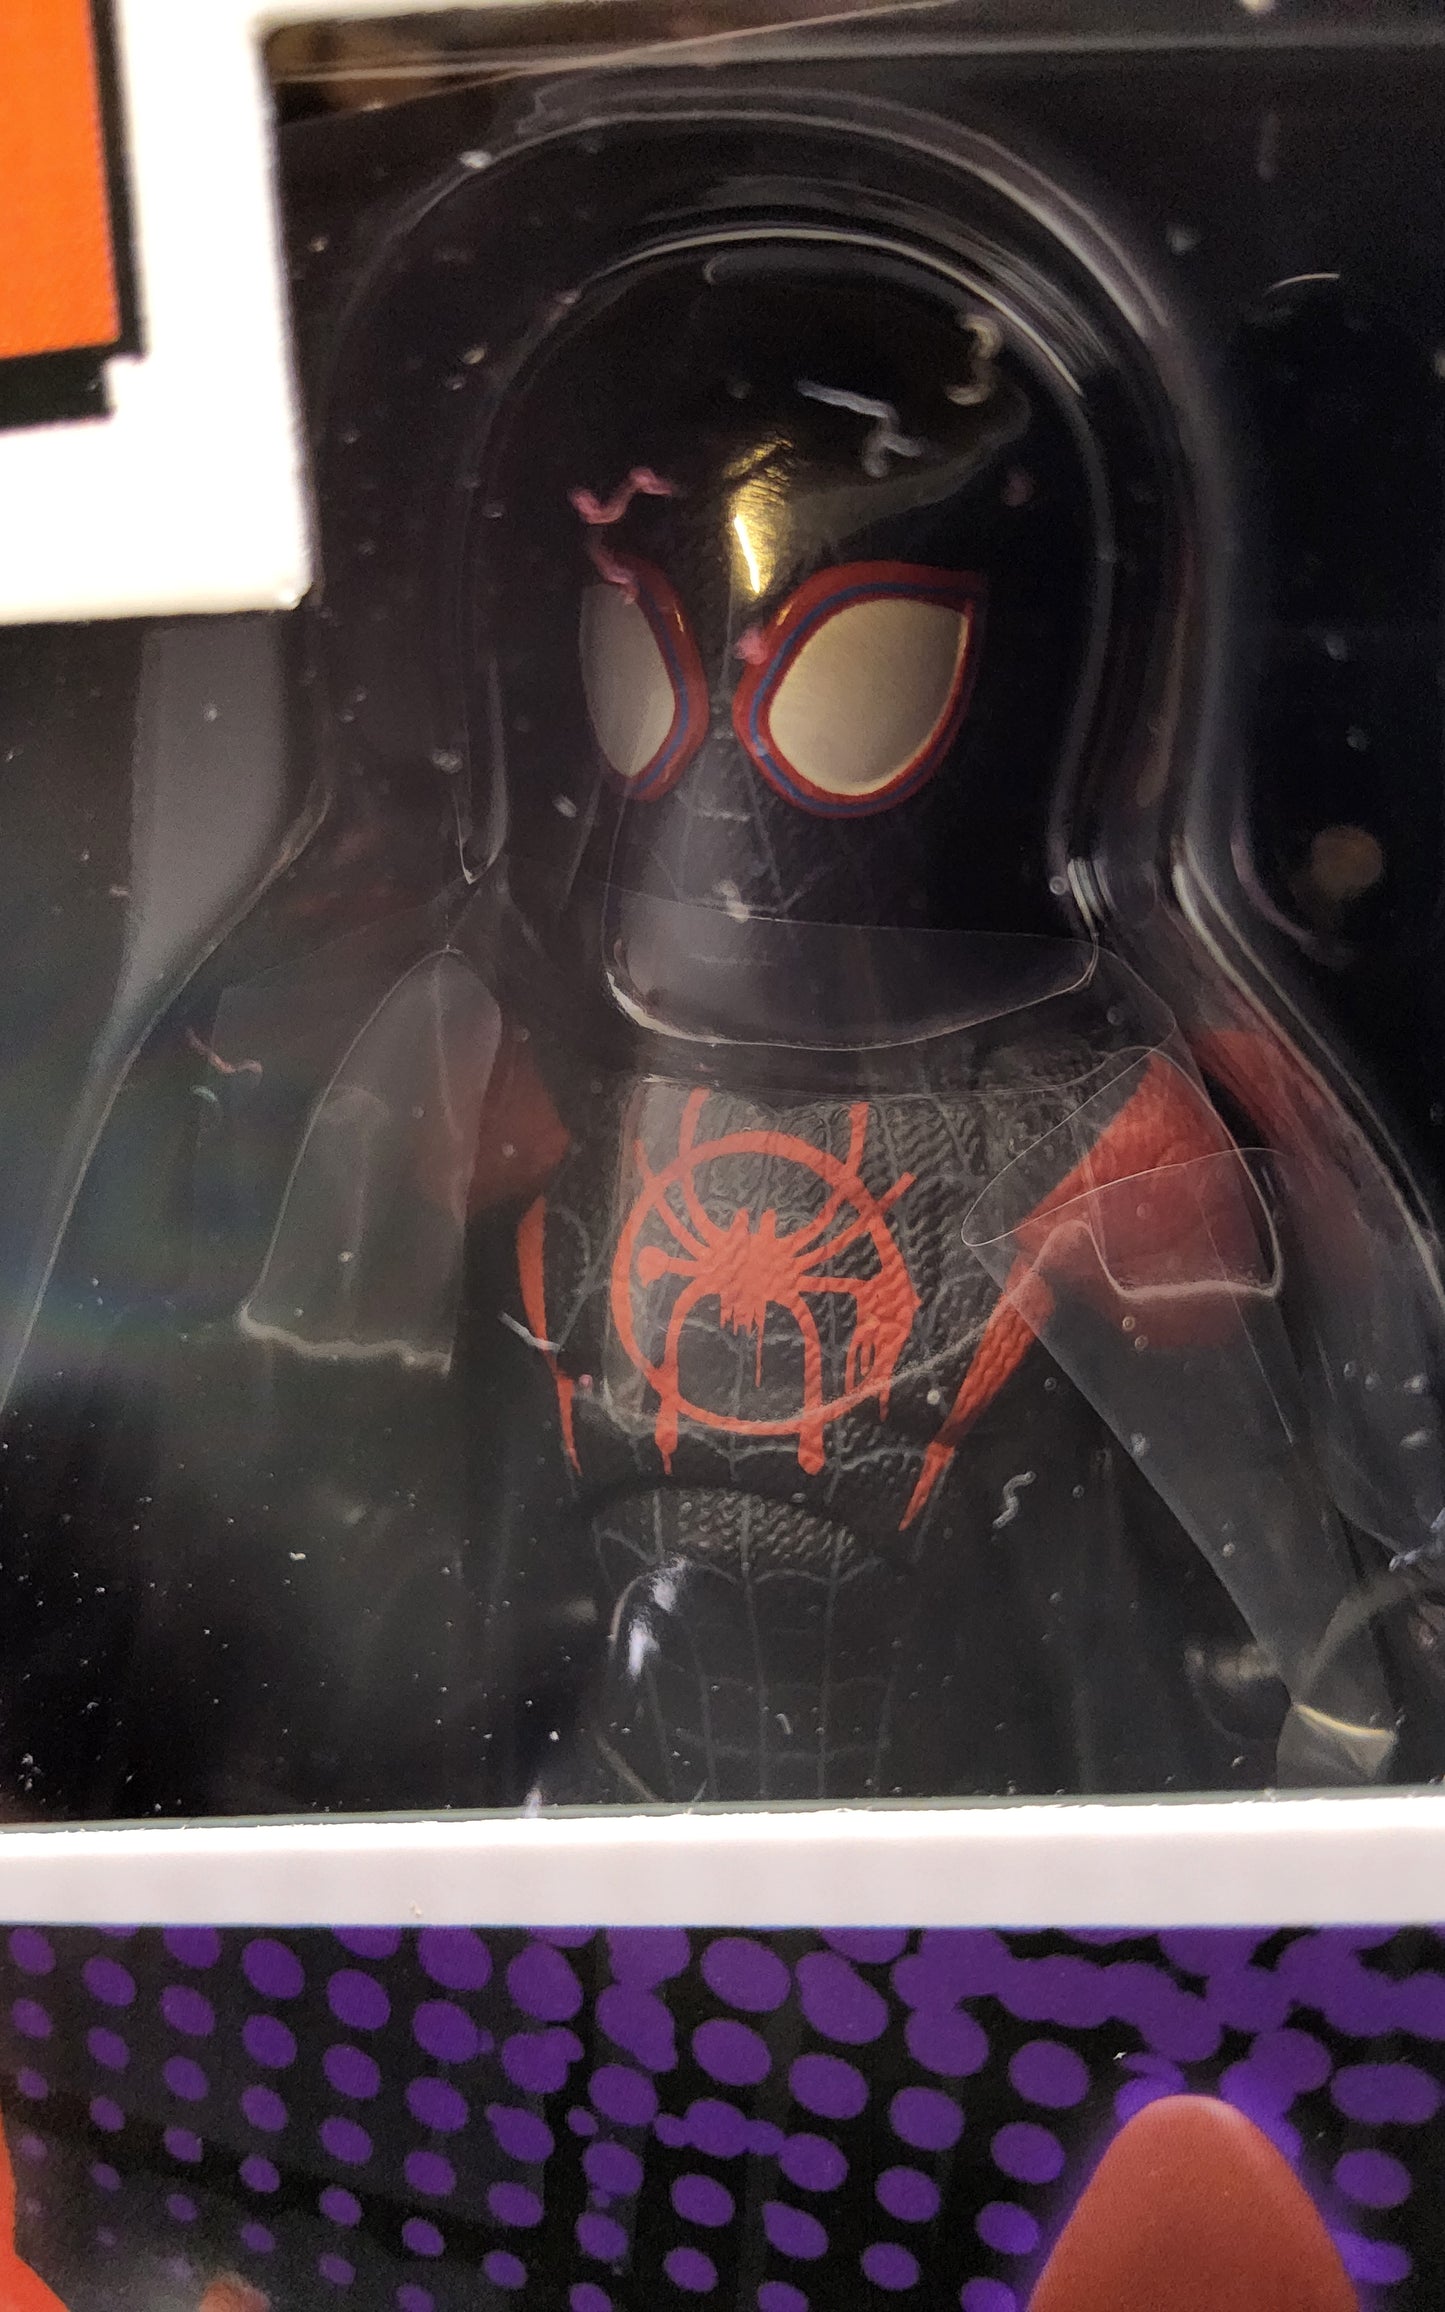 Spider-Man: Into The Spider-Verse Miles Morales Sentinel SV Action Figure